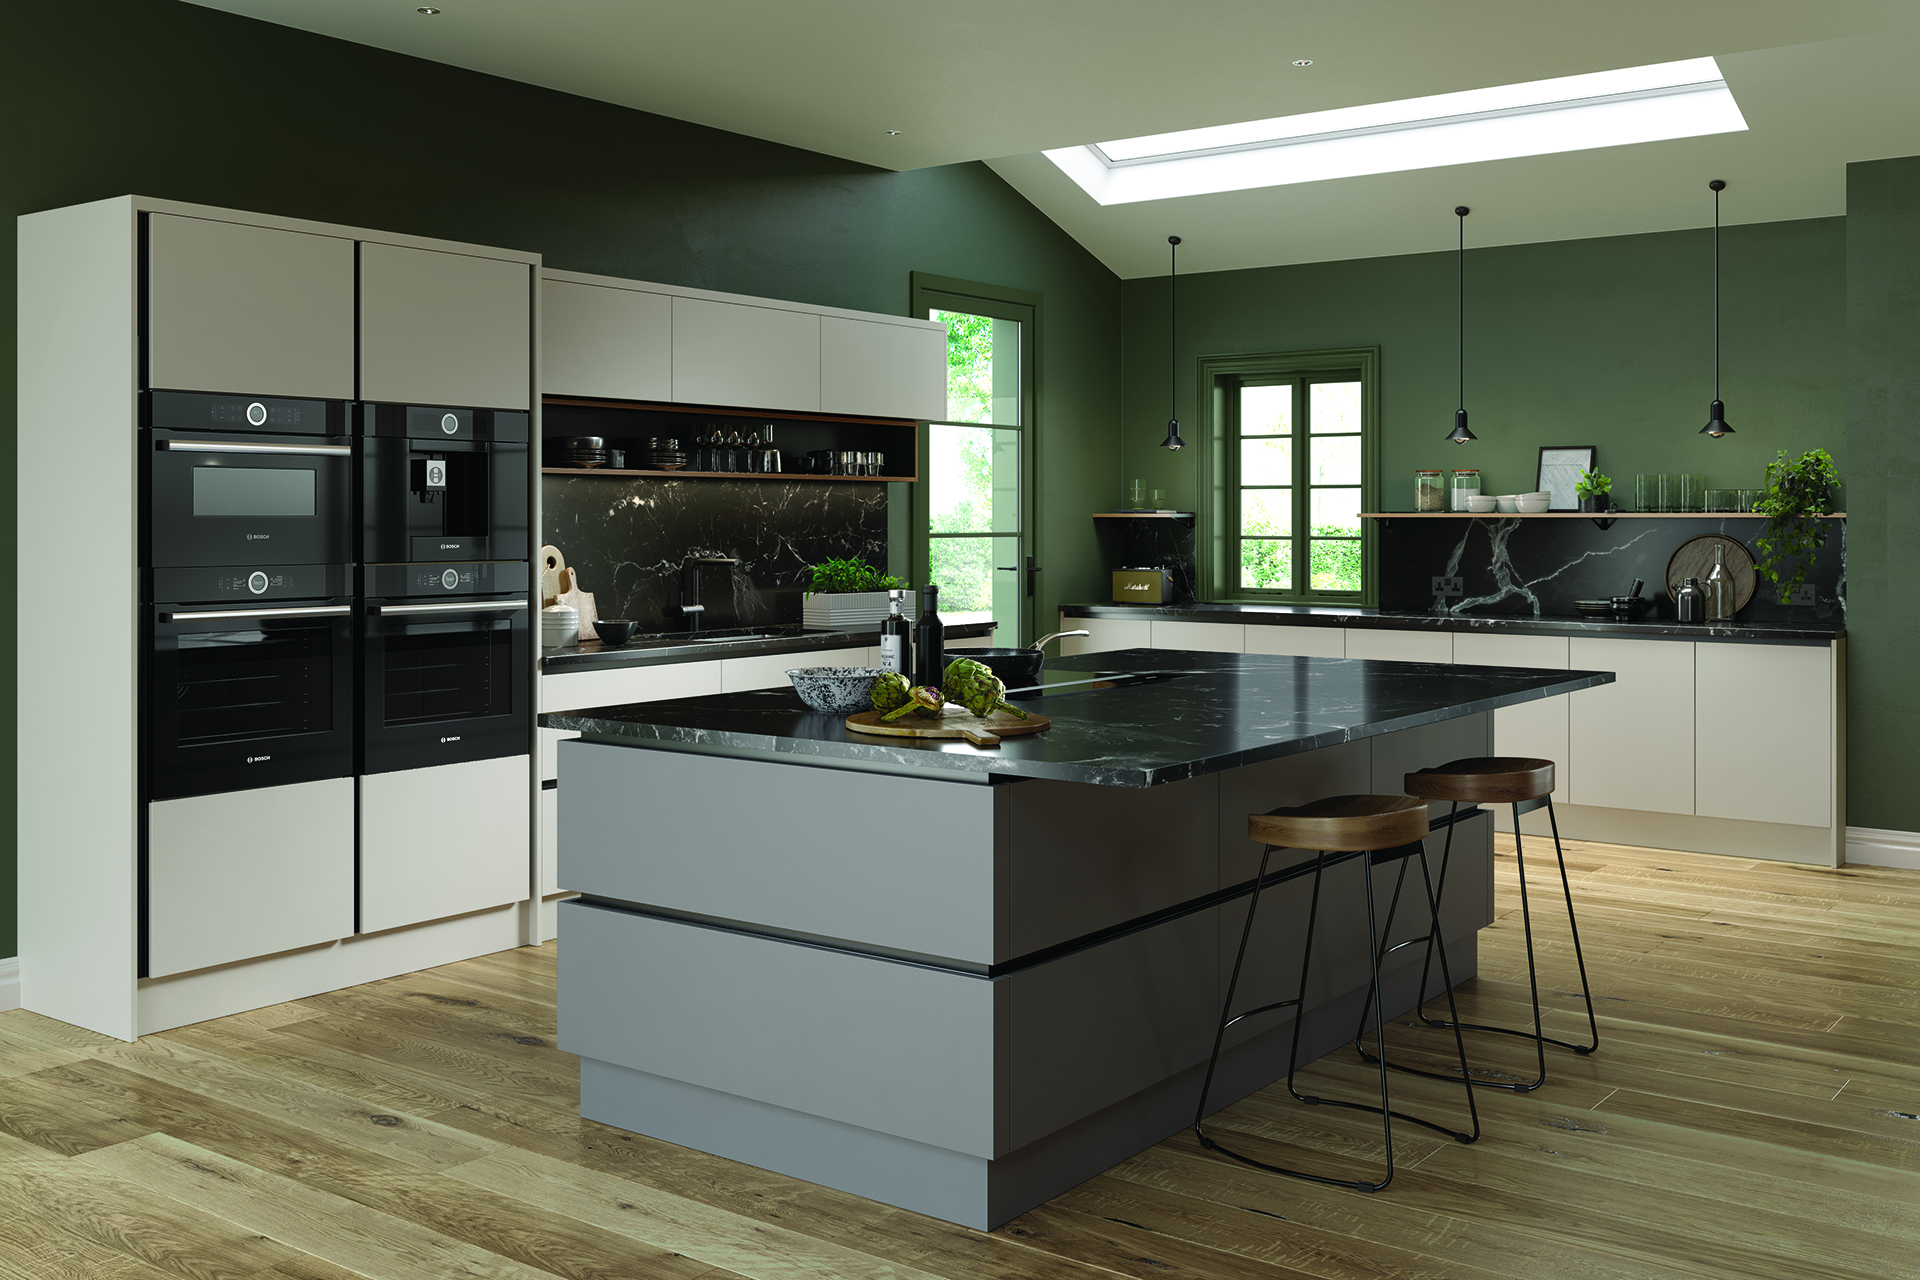 2. All I want for Christmas is the InRail Valore Smooth Cashmere & Smooth Dust Grey kitchen